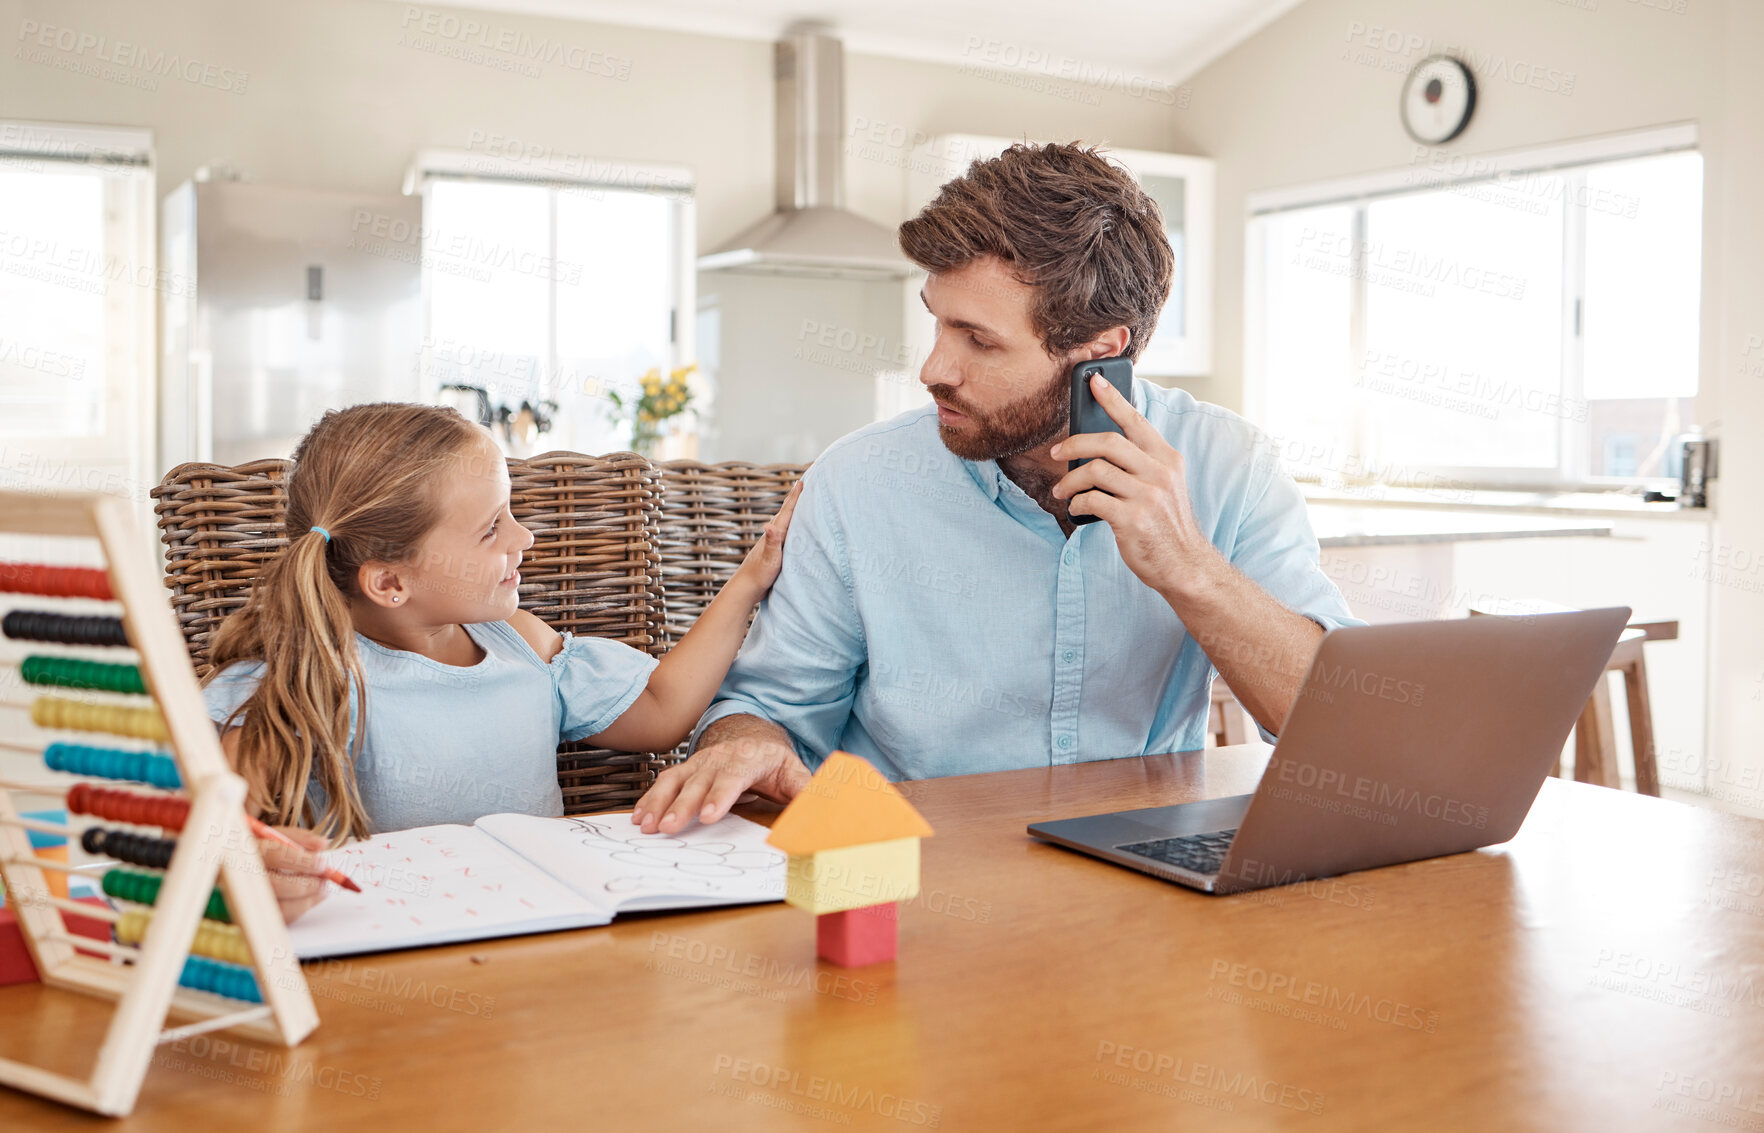 Buy stock photo House, kid study and working dad using phone doing child care and remote work. Family home of a man helping his girl with school learning help while on a corporate business call by a computer